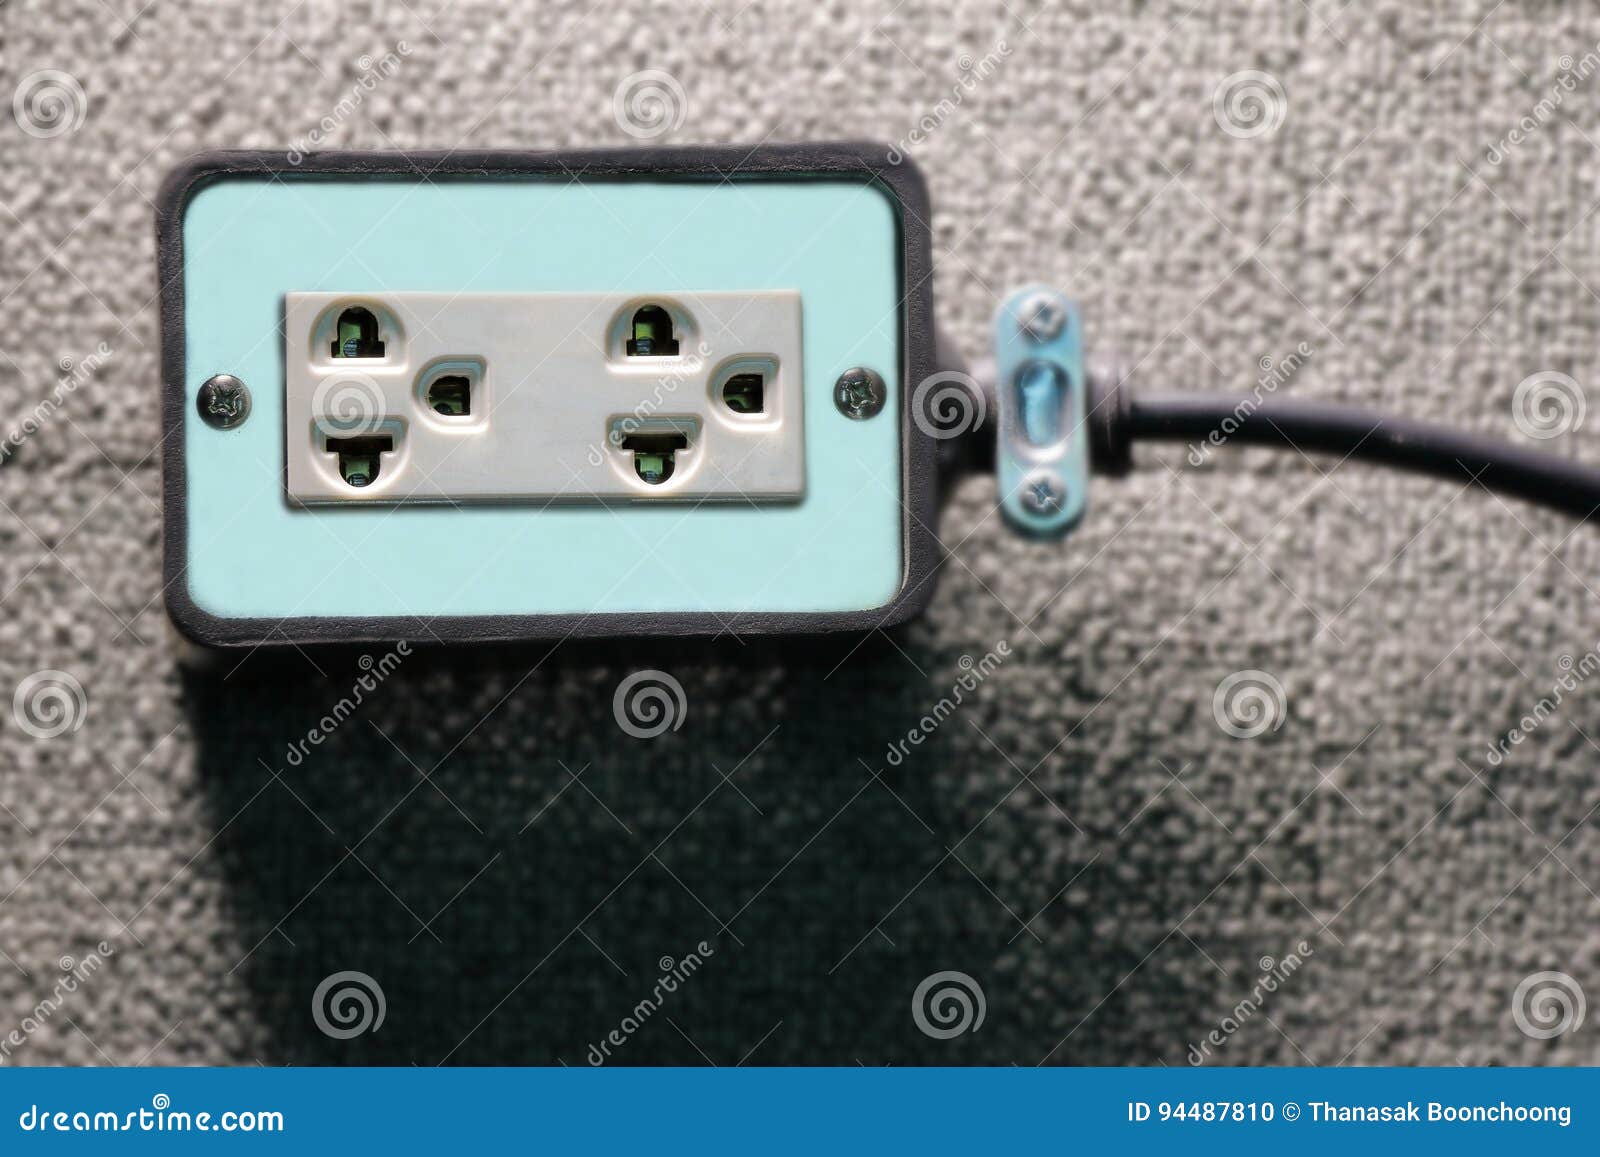 Electrical Outlet Plug On Floor Stock Photo Image Of Floor